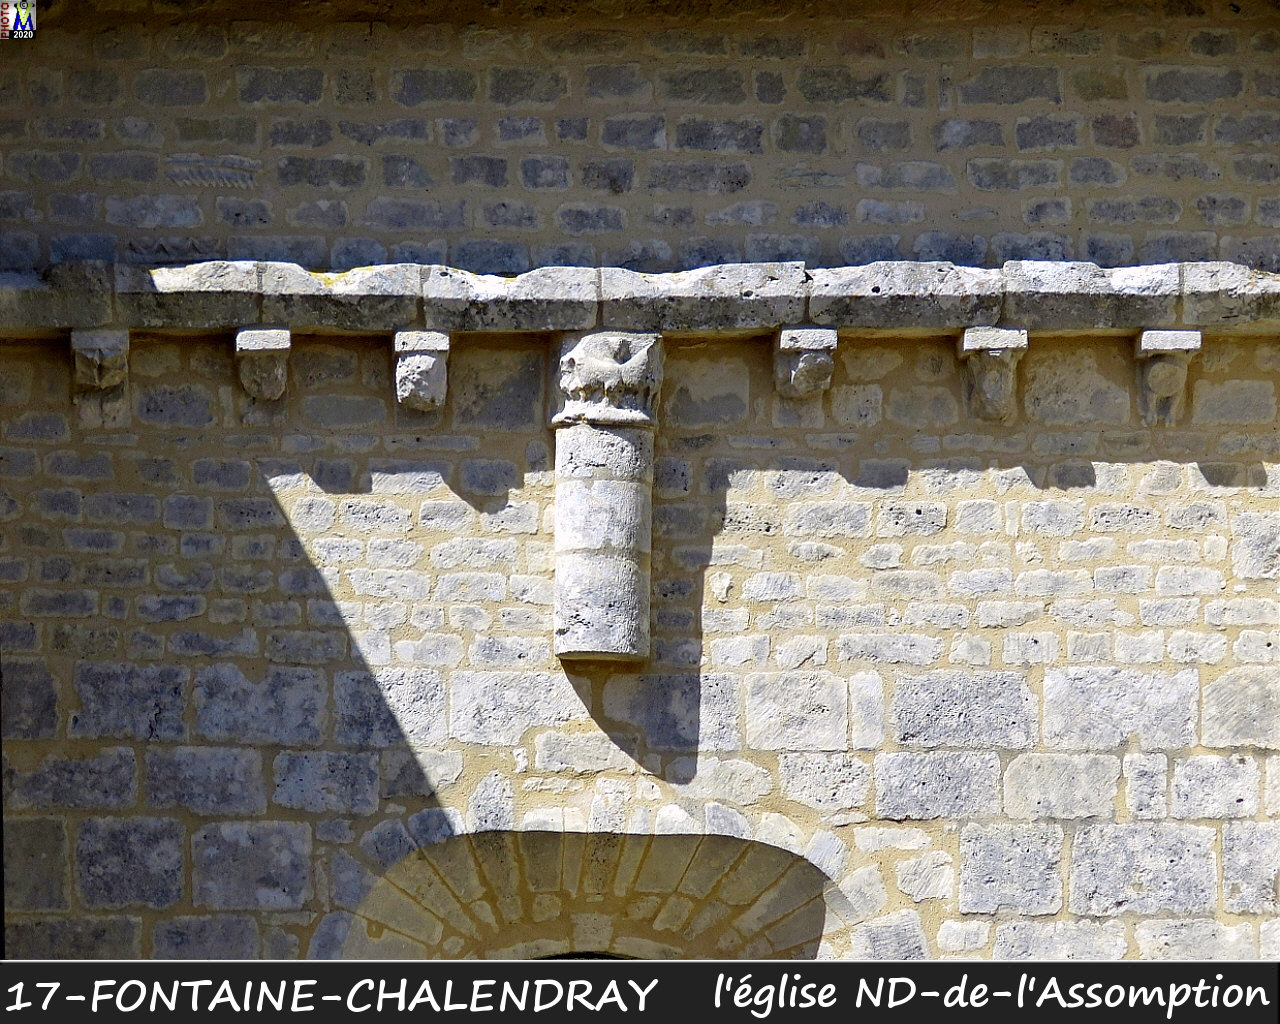 17FONTAINE-CHALENDRAY_eglise_1008.jpg